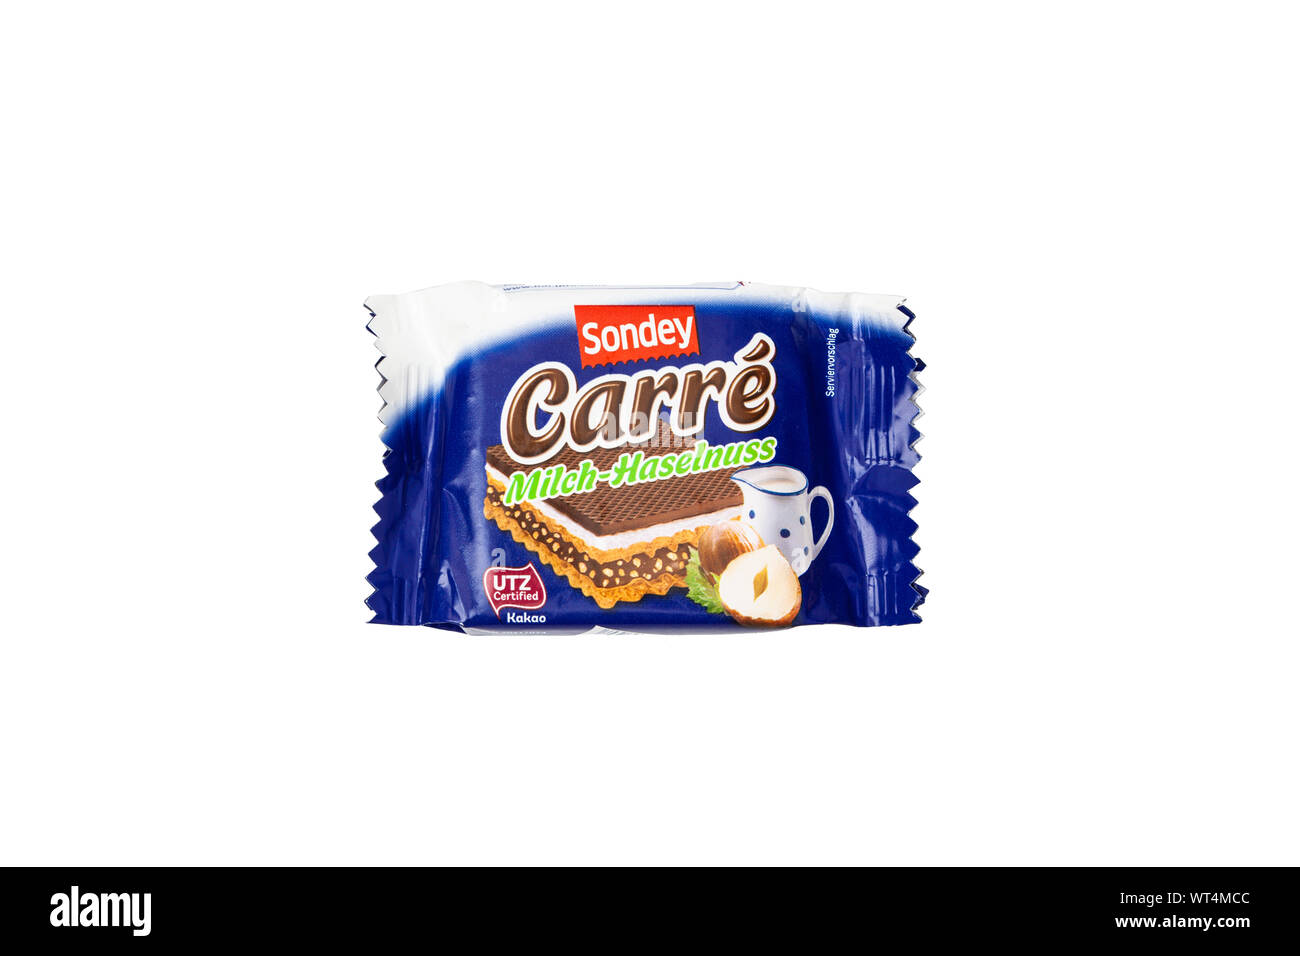 CHISINAU, MOLDOVA - September 9, 2019: SONDEY Carré Waffles milk-hazelnut. Is a popular European manufacturer of sweets, desserts and cookies. Stock Photo